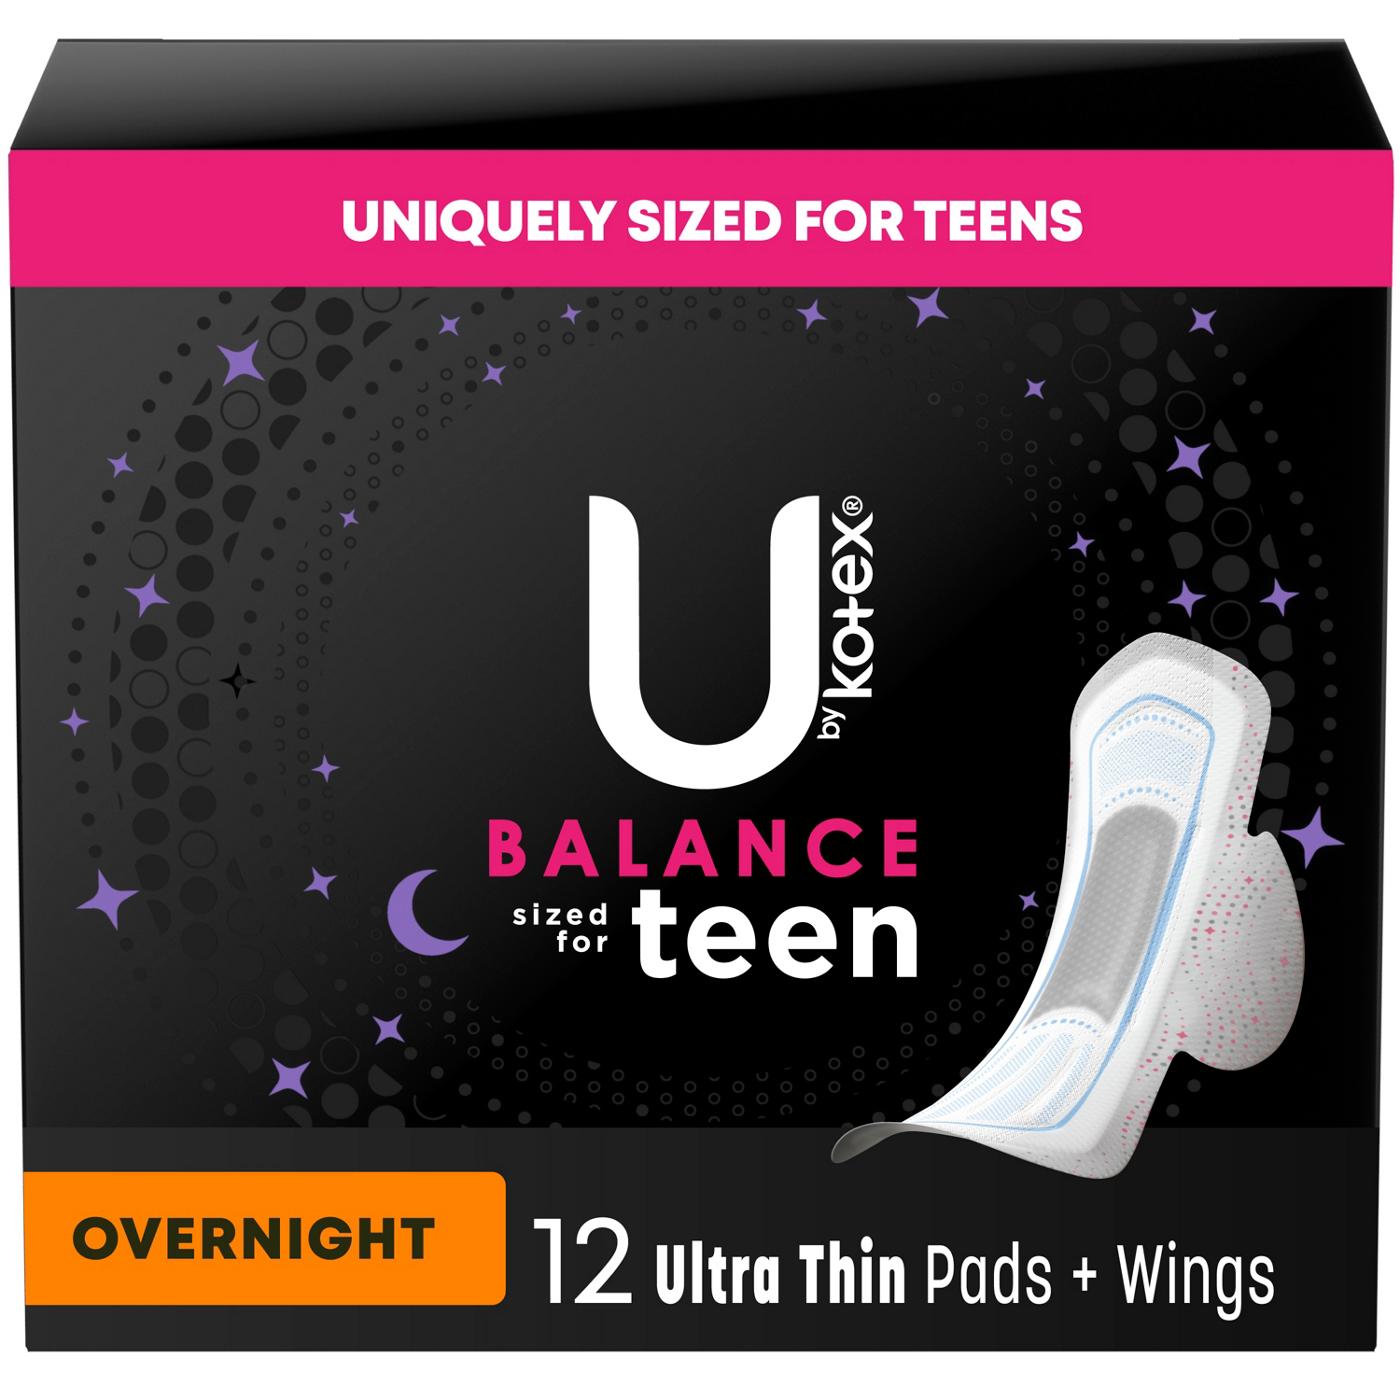 U by Kotex Balance - Sized for Teens Ultra Thin Overnight Pads with Wings; image 1 of 8